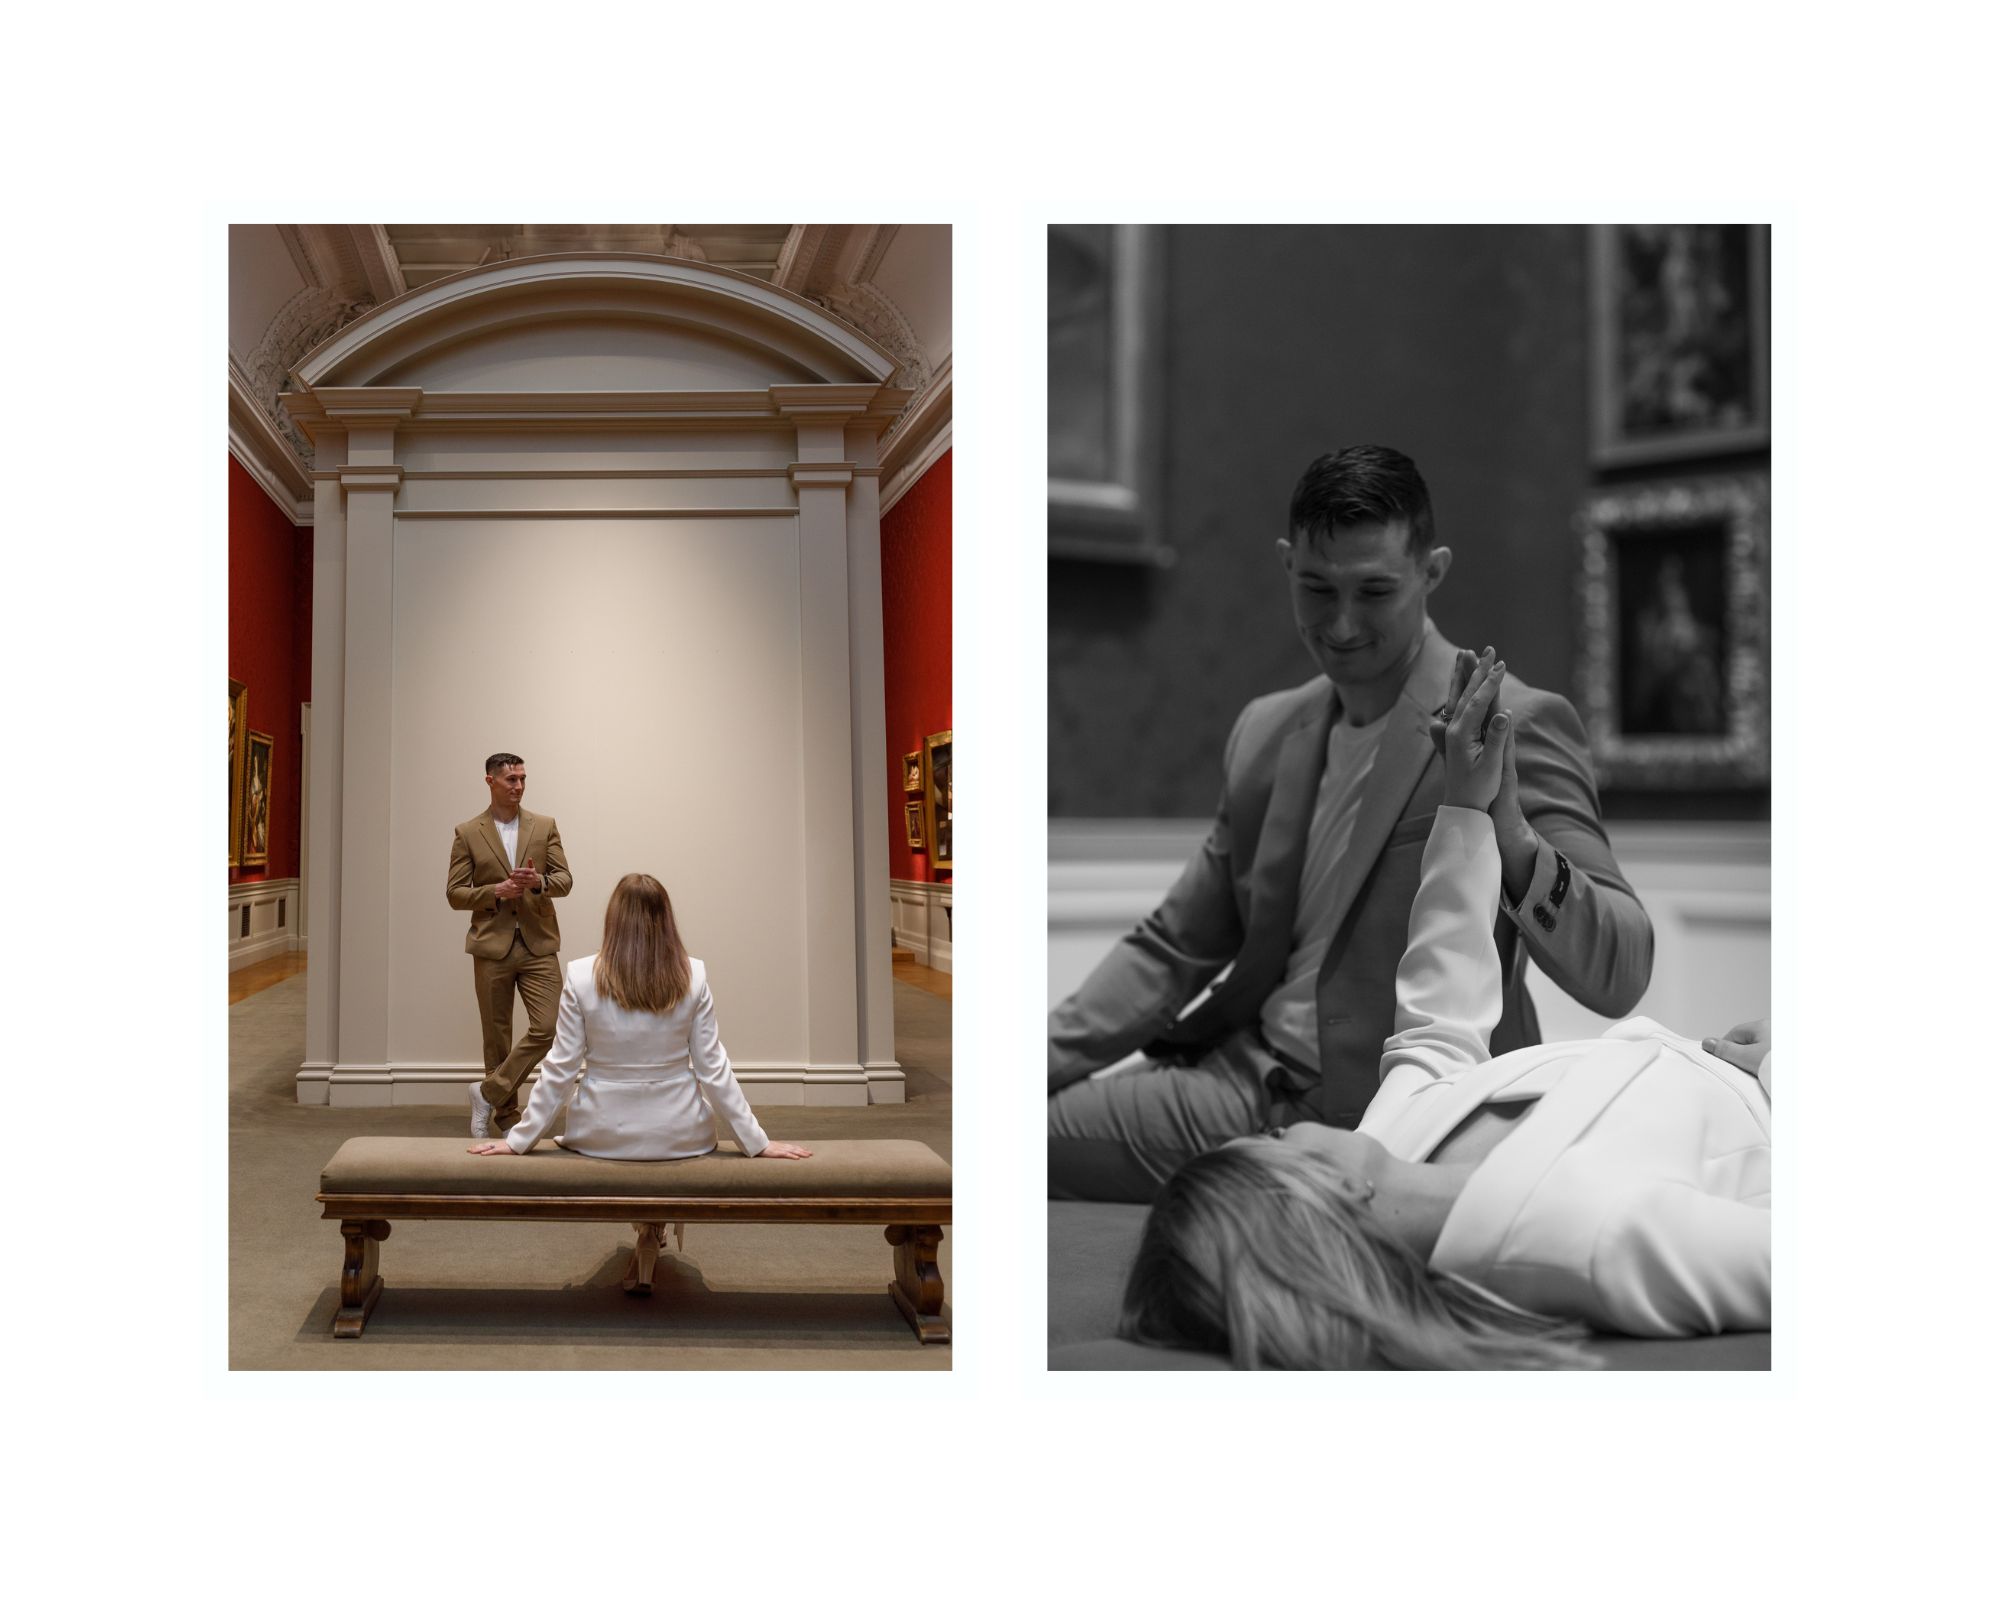 Unique art gallery engagement photos. The groom is pretending to be a statue while the bride watches him.